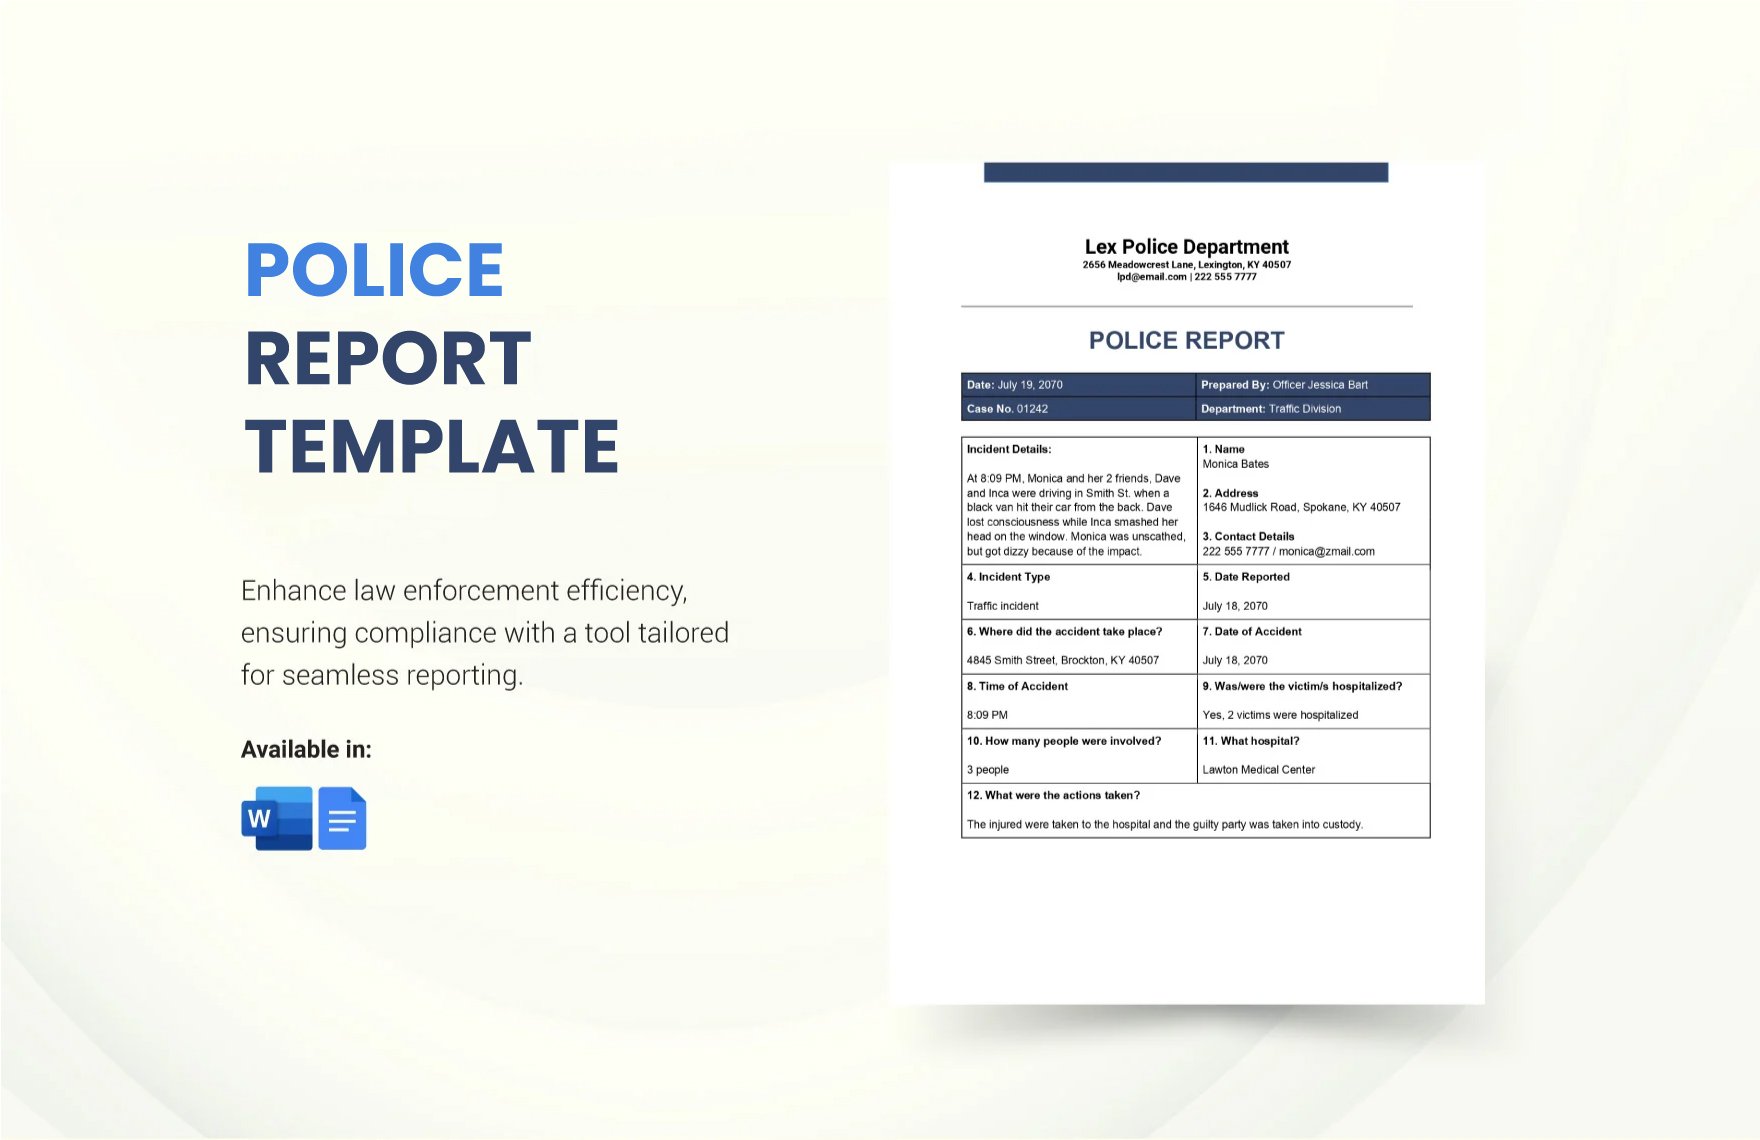 Police Report Template in Word, Google Docs